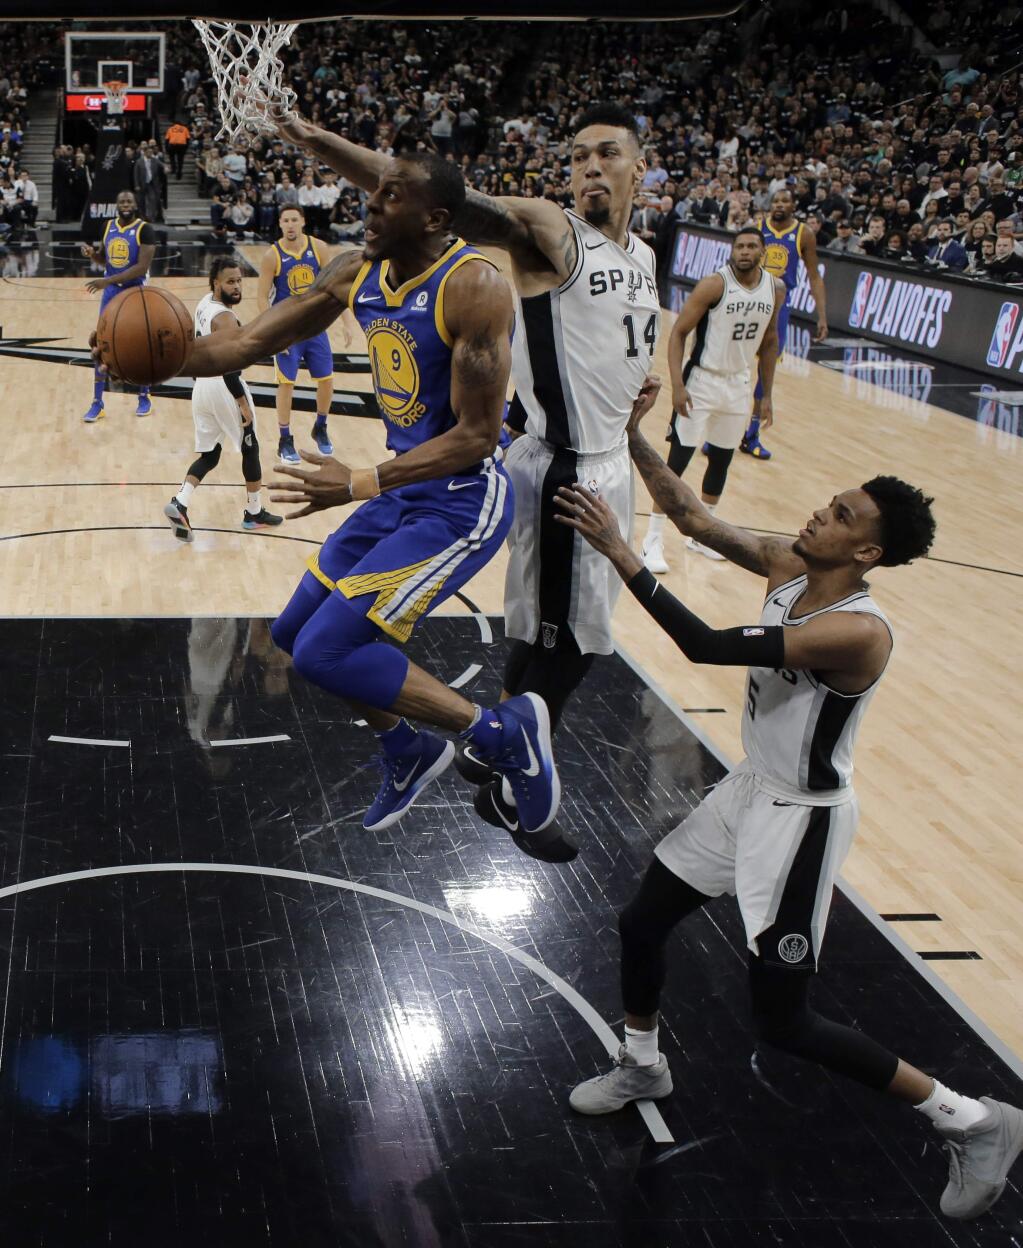 Golden State Warriors forward Andre Iguodala (9) goes up for a shot as San Antonio Spurs' Danny Green (14) and Dejounte Murray (5) defend during the first half of Game 3 of a first-round NBA basketball playoff series in San Antonio, Thursday, April 19, 2018. (AP Photo/Eric Gay)